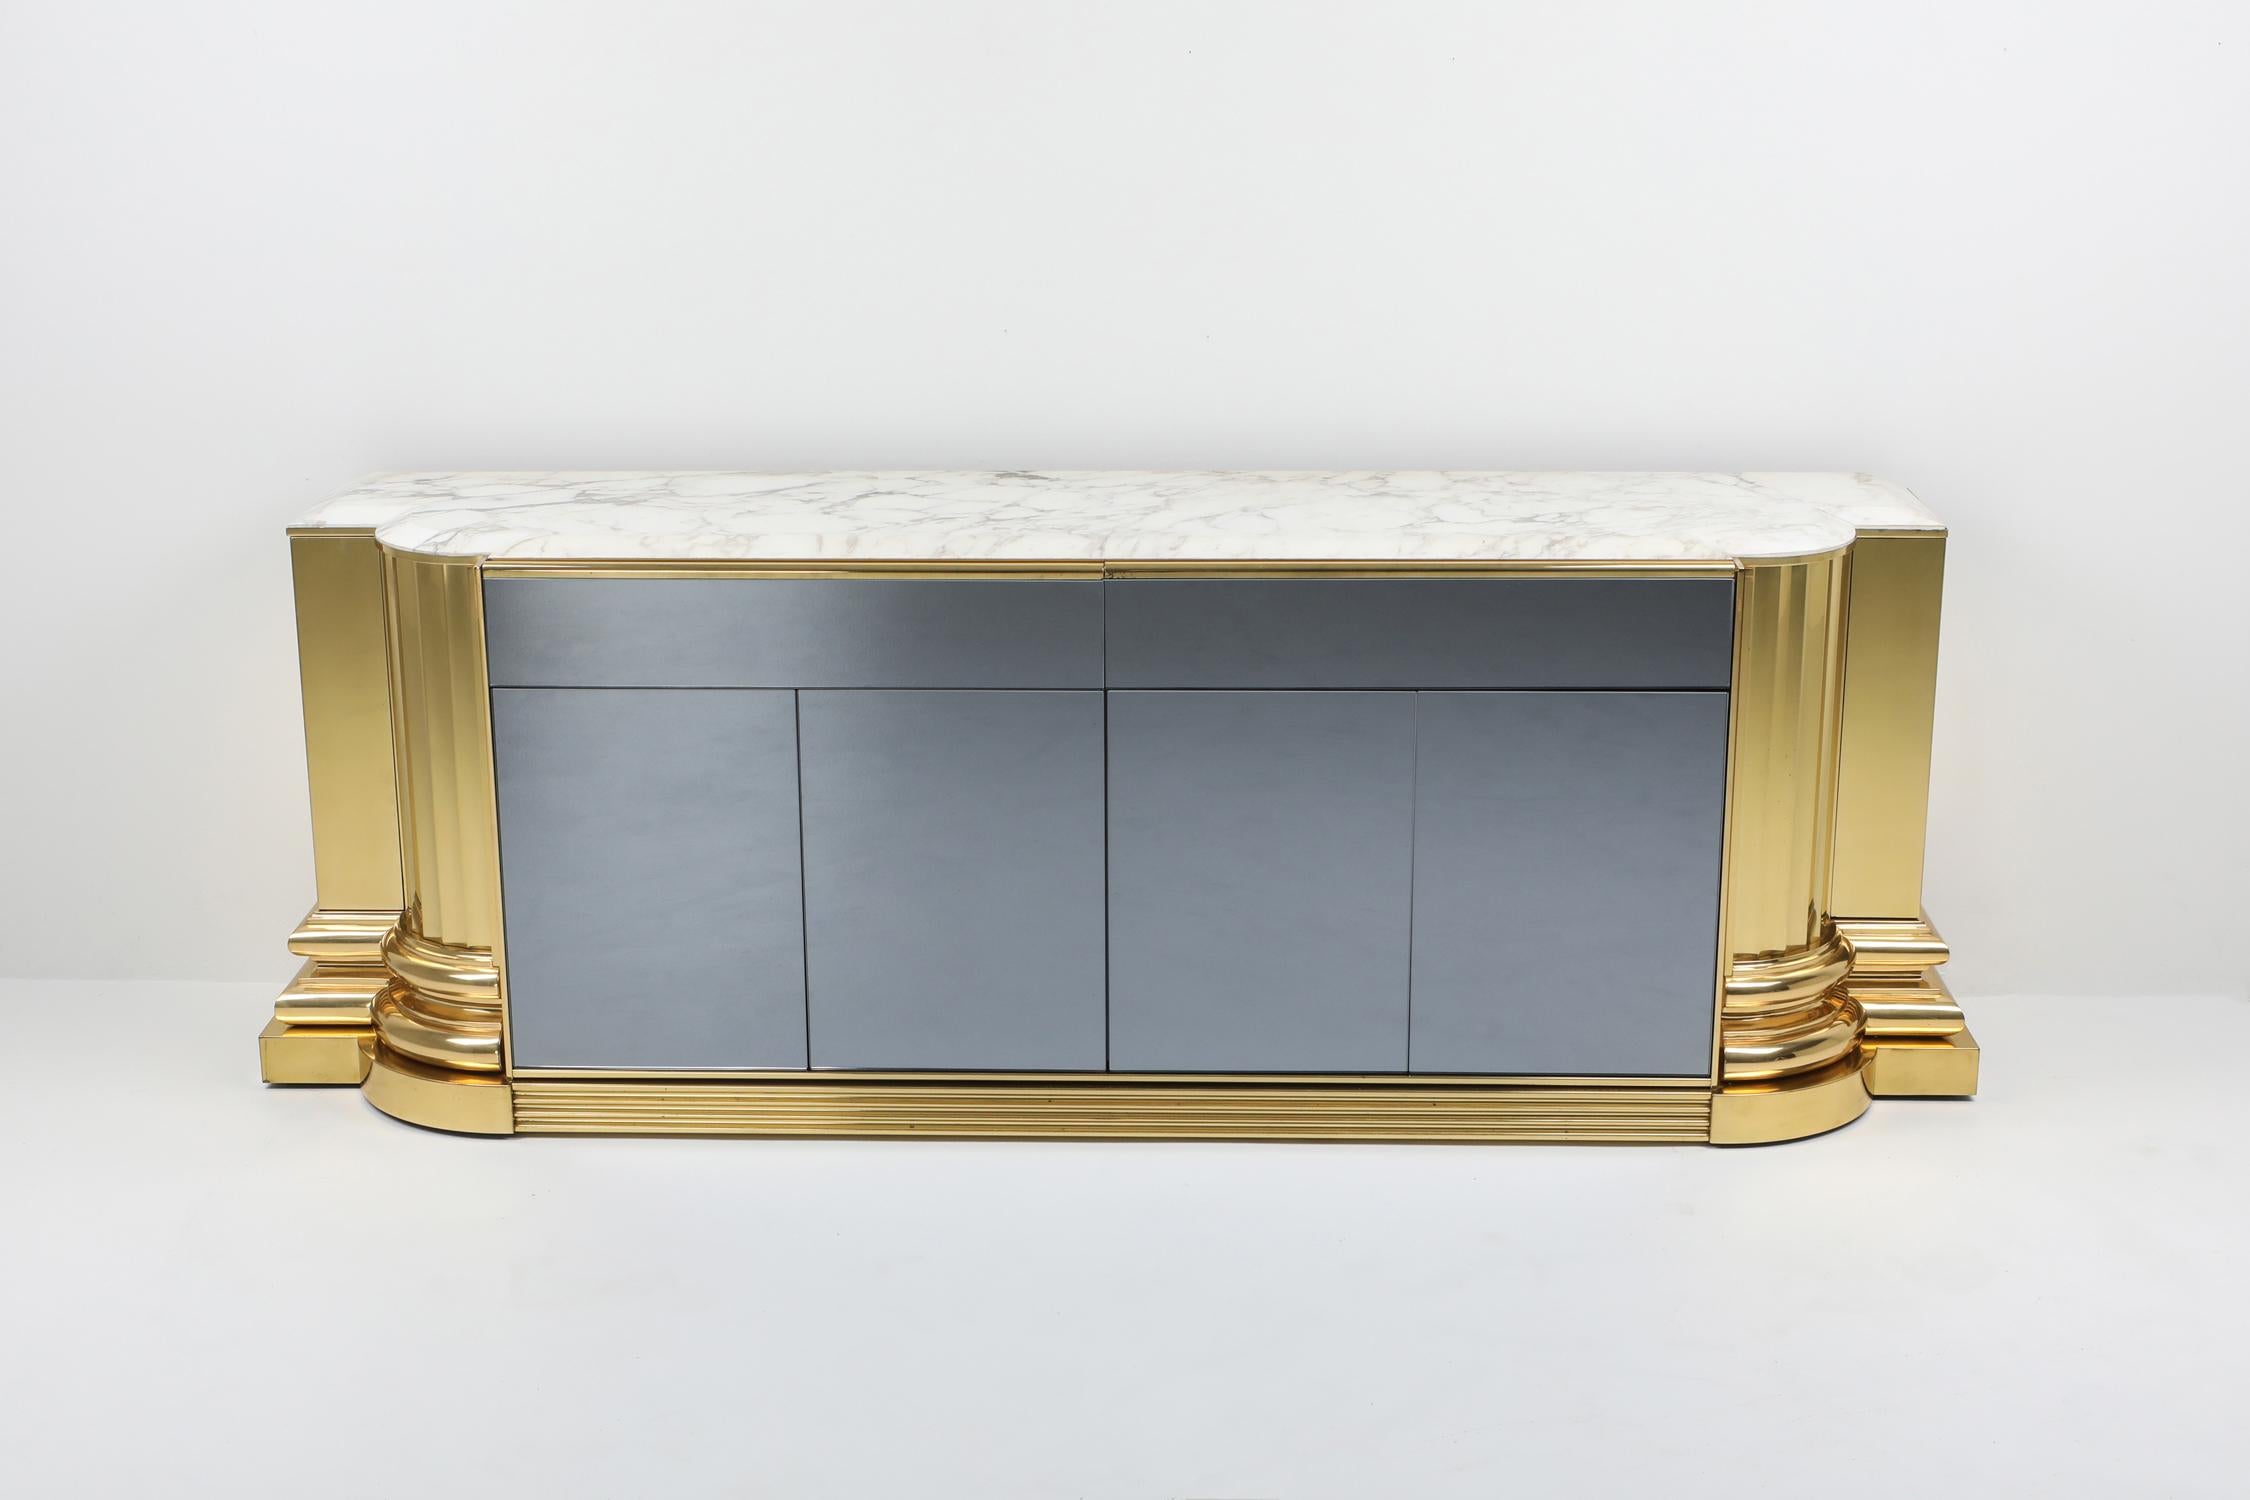 Hollywood Regency sideboard by Sandro Petti for l'angelometallarte.
A true high end piece which shows in the top level of finishing.

A modernist roman style sculptural work with four front doors in mirrored glass complemented with four top